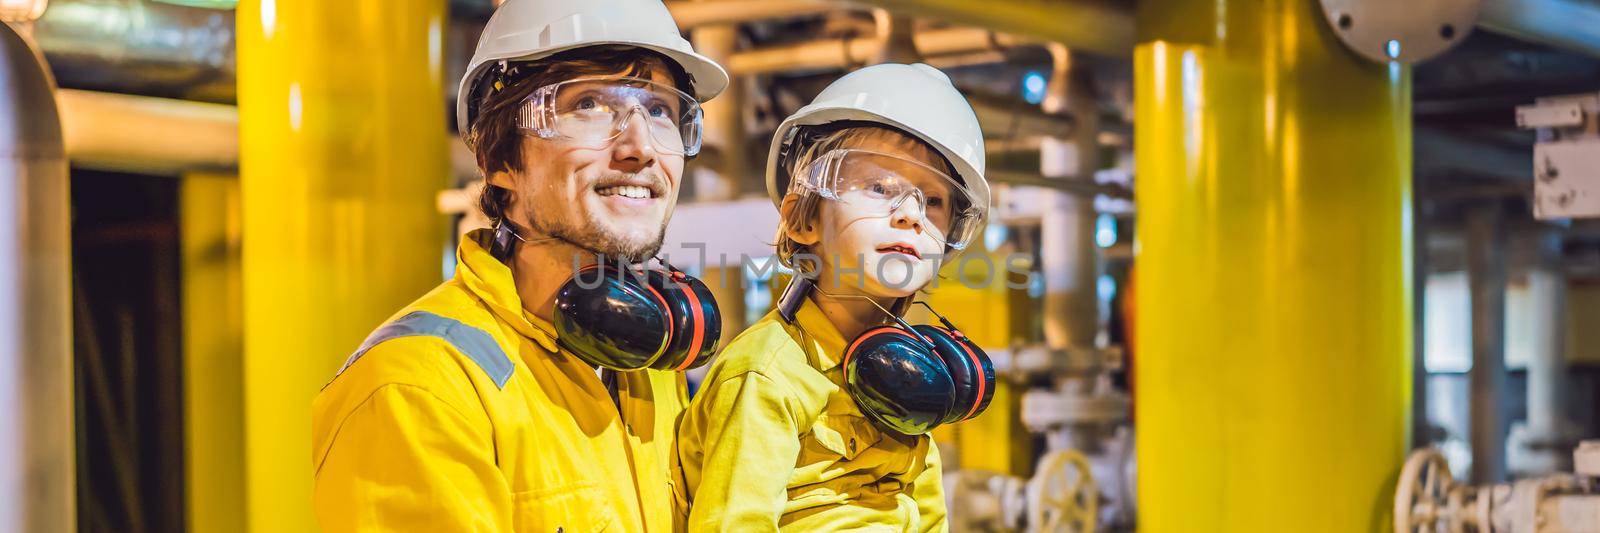 BANNER, LONG FORMAT Young man and a little boy are both in a yellow work uniform, glasses, and helmet in an industrial environment, oil Platform or liquefied gas plant by galitskaya